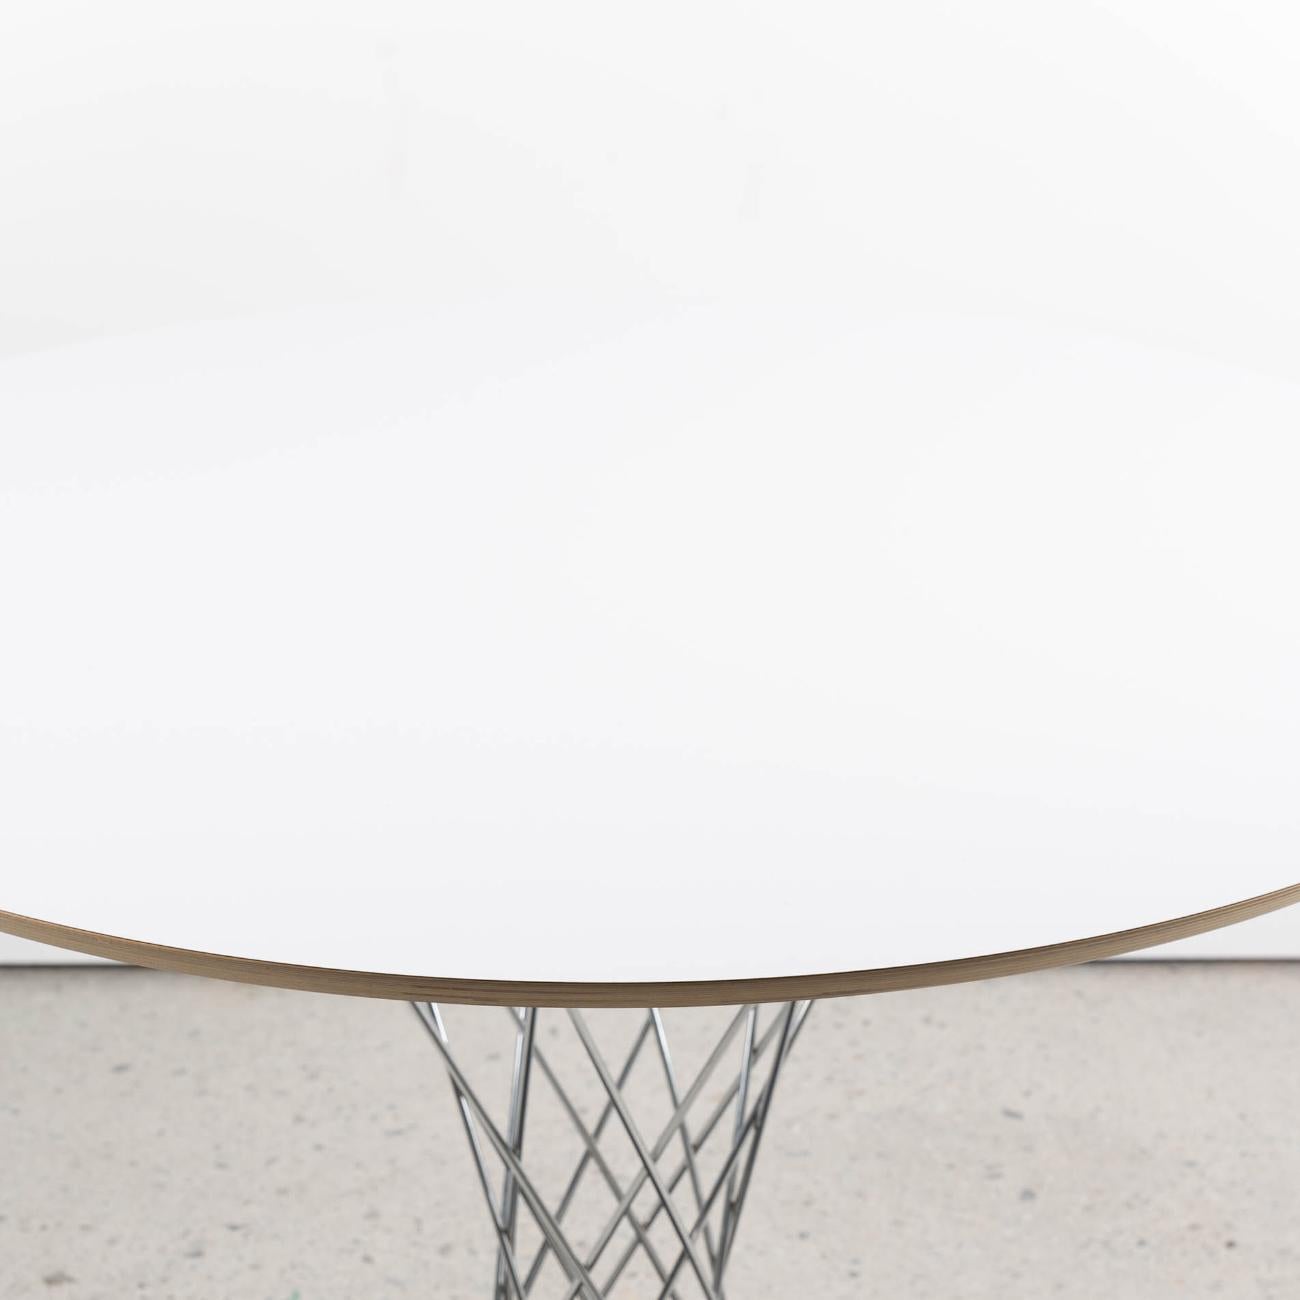 With an eye-catching wire silhouette and cast-iron black base, the Noguchi Cyclone table was originally created as a playful stool, and later scaled to table size when Hans Knoll told Noguchi he thought the design would be a perfect complement to